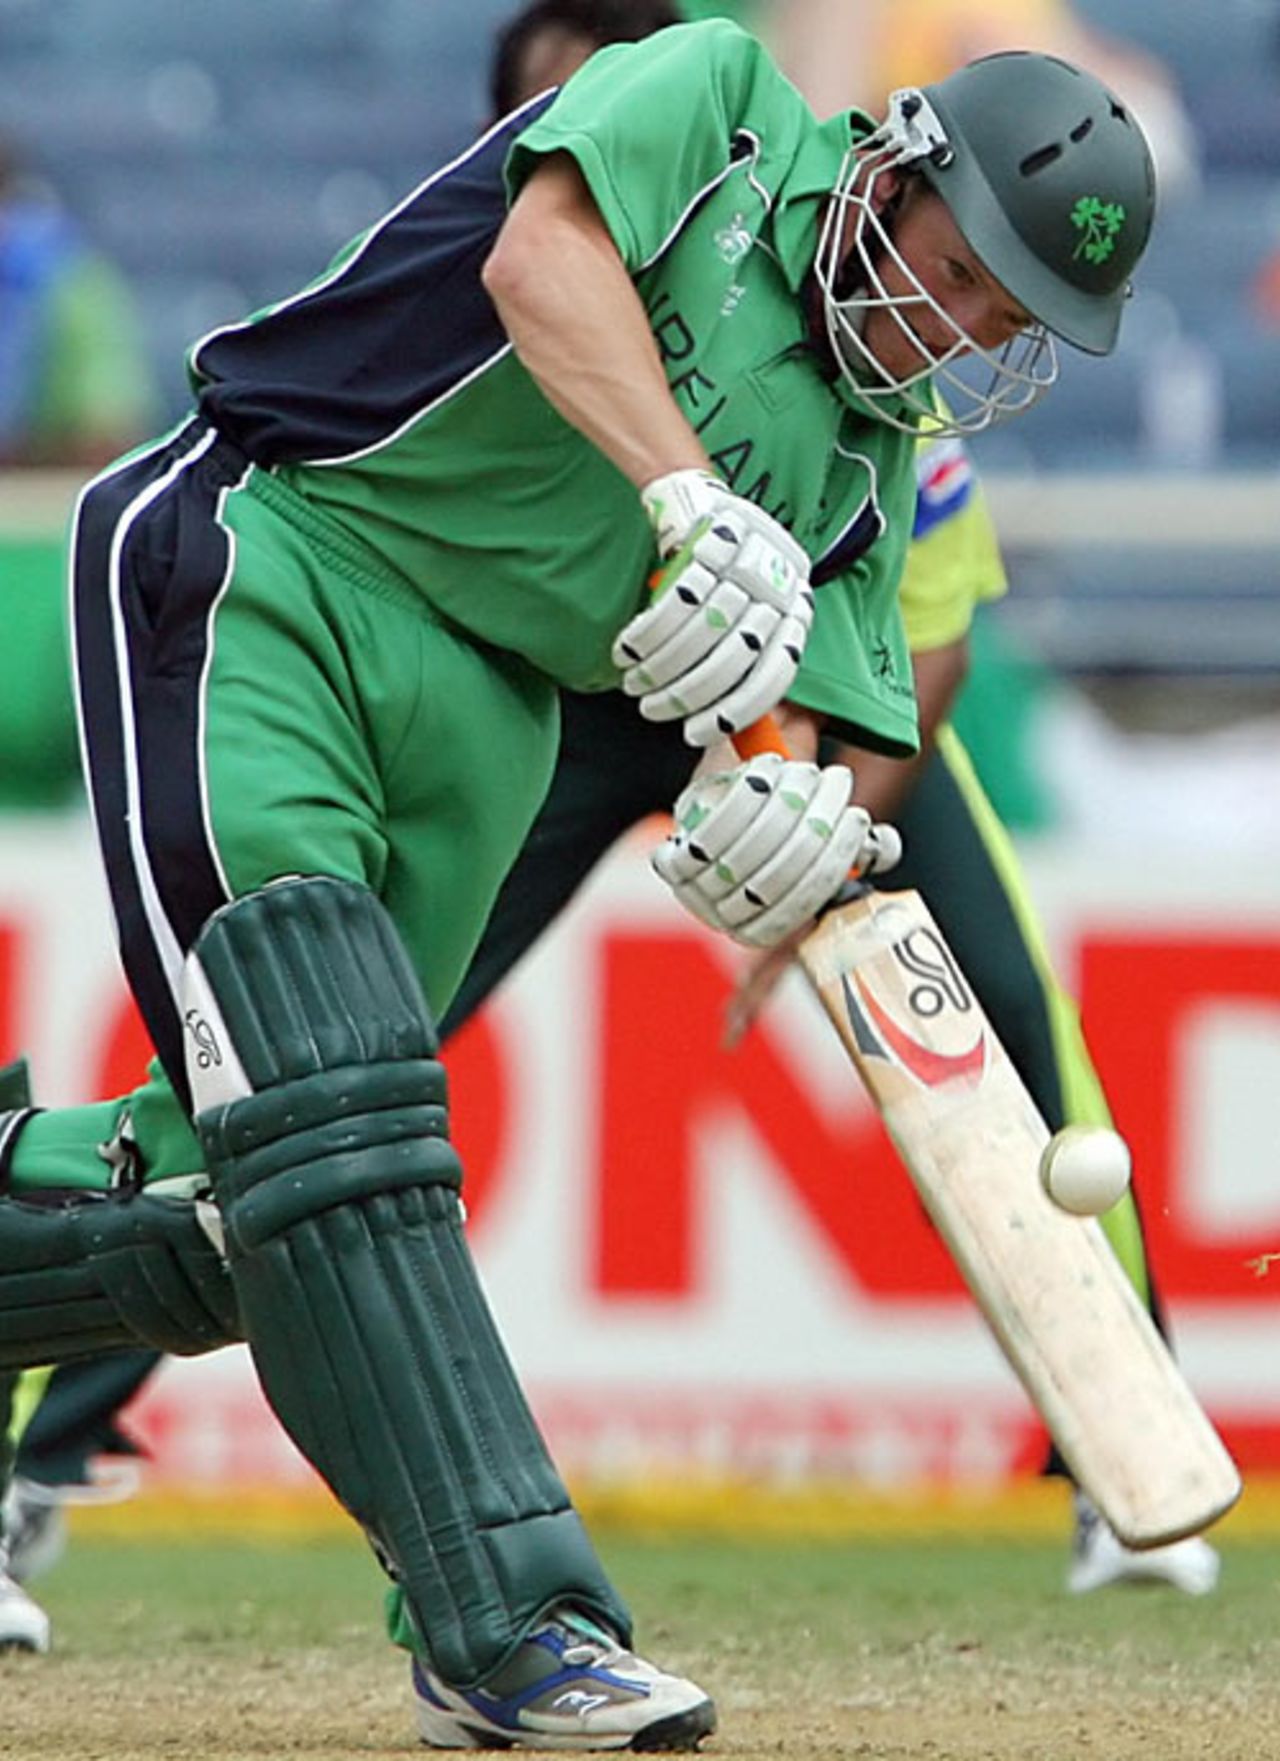 Niall O'Brien clips to leg during his fifty, Ireland v Pakistan, Group D, Jamaica, March 17, 2007